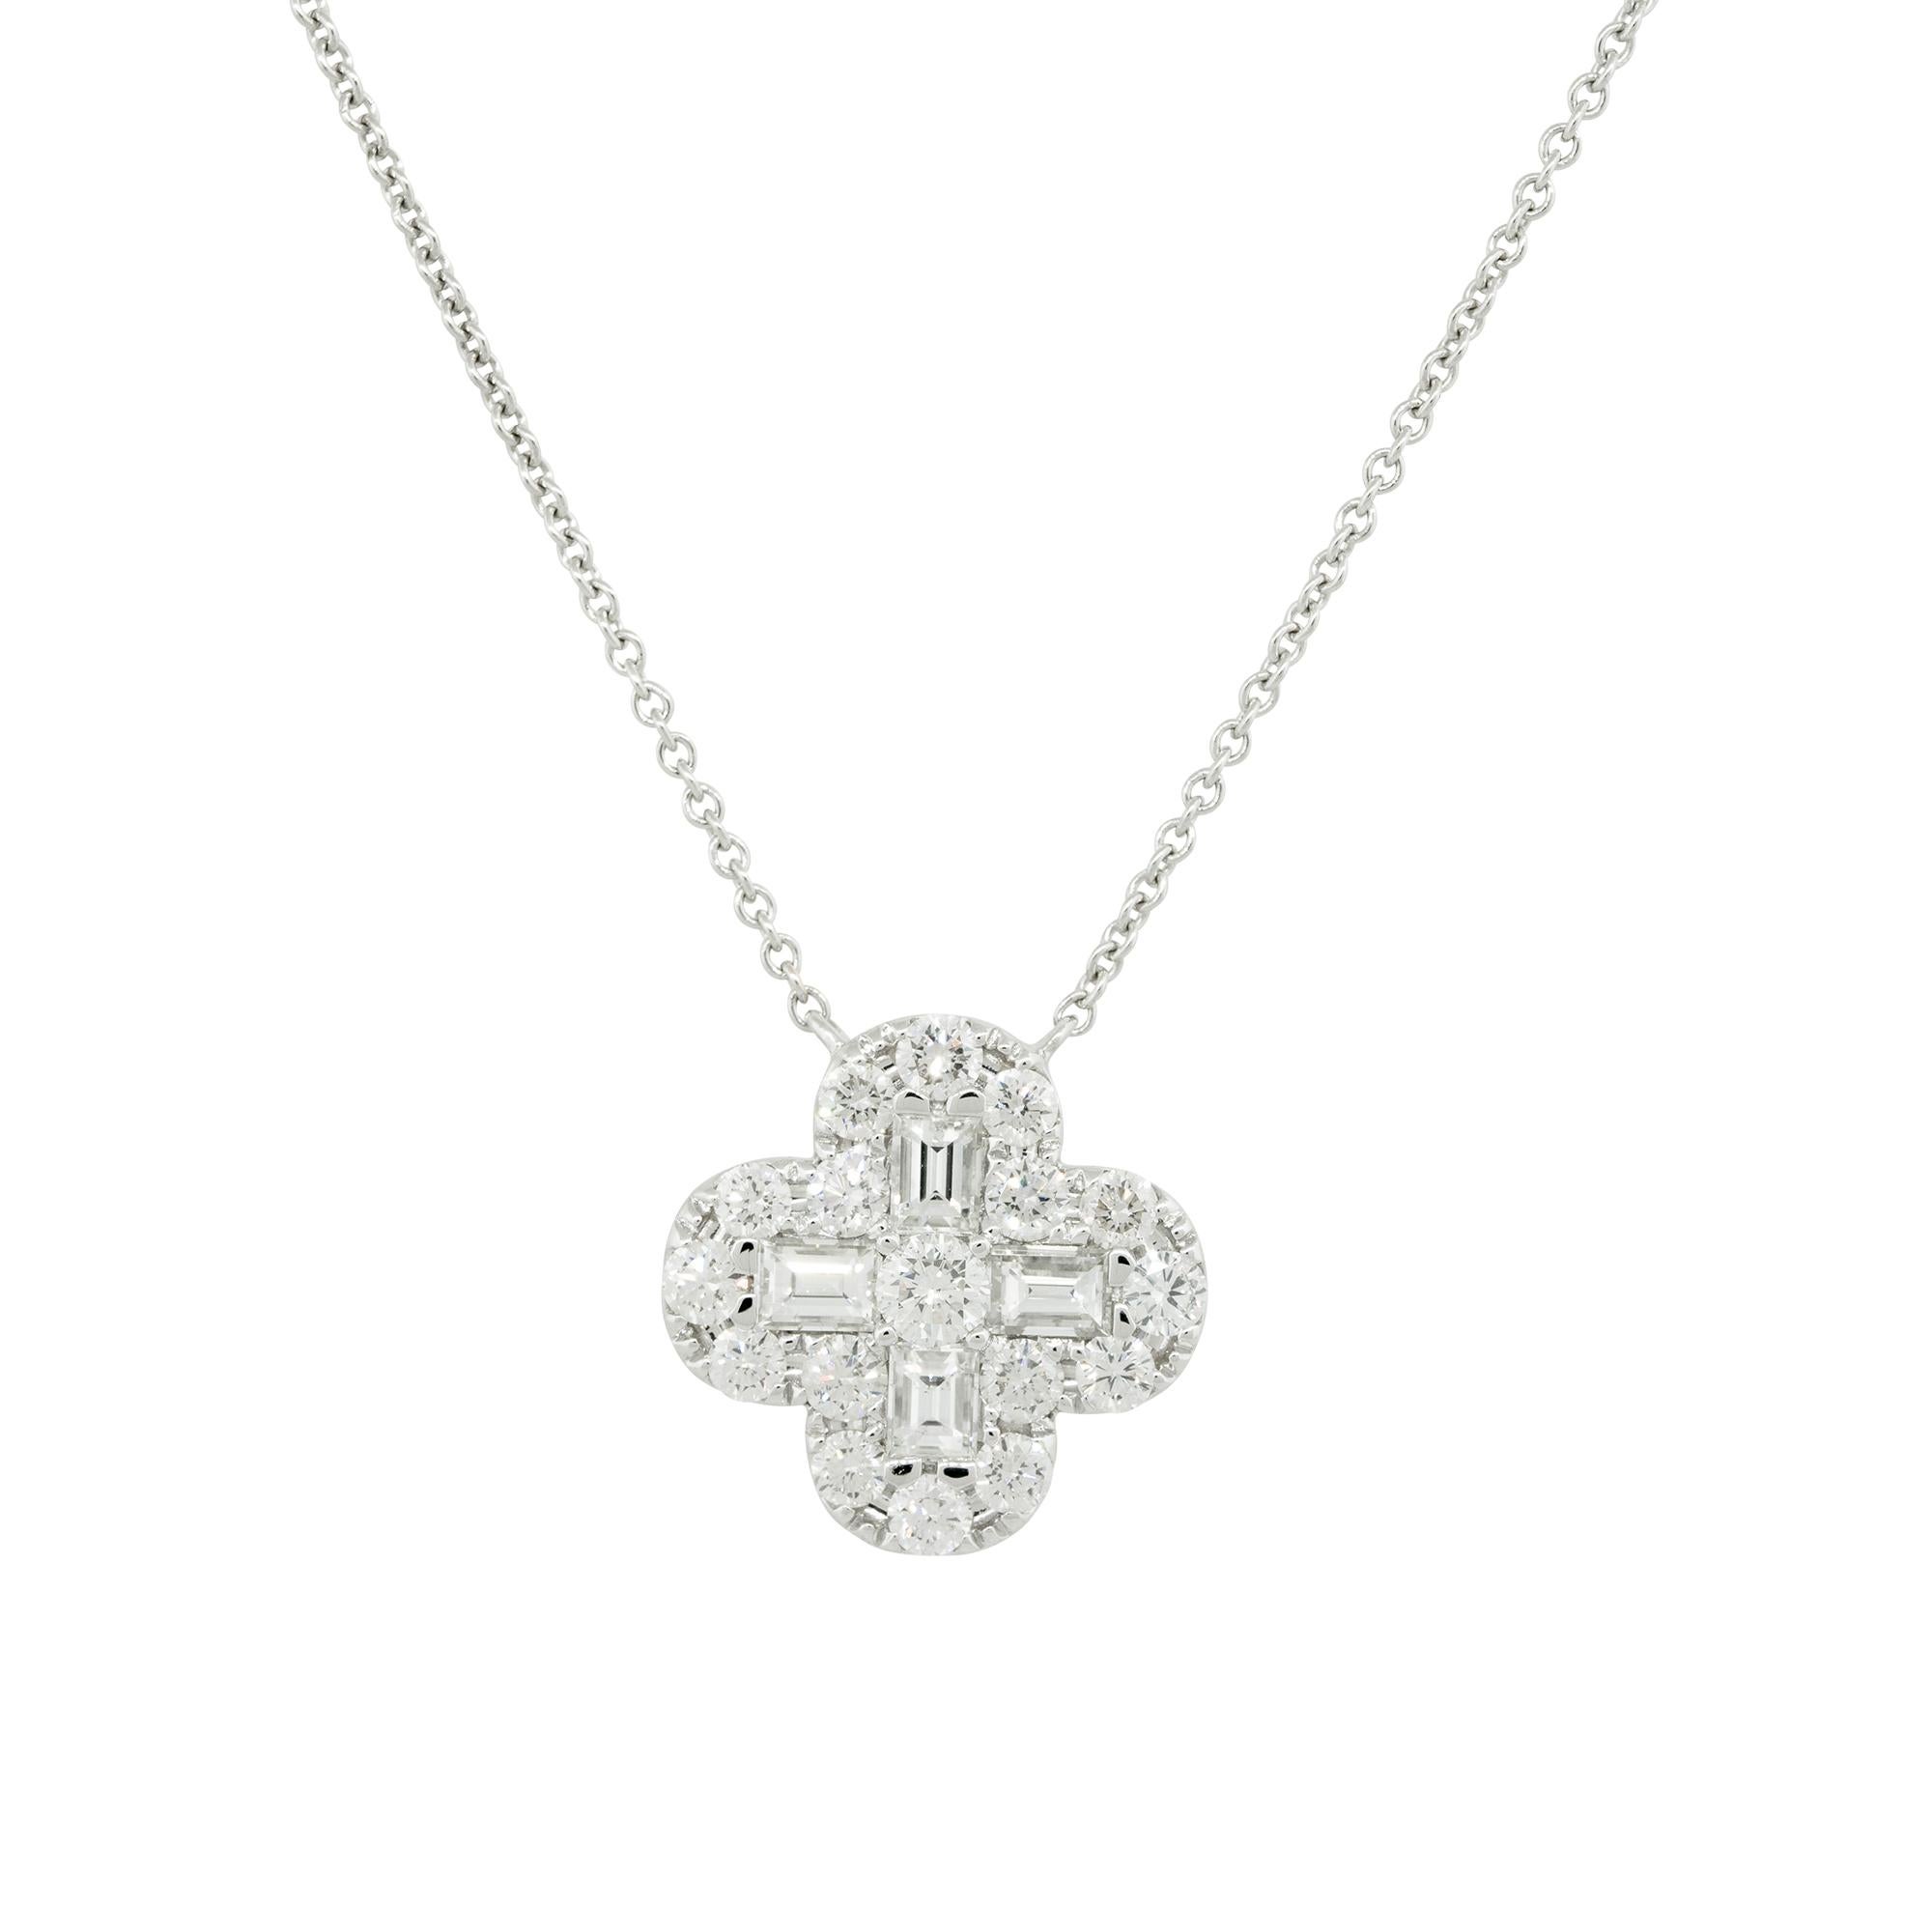 18k White Gold 2.0ctw Mosaic Diamond Clover Necklace
Material: 18k White Gold
Diamond Details: Approximately 2.0ctw of Round Brilliant and Baguette cut Diamonds. There are 21 stones total; 4 Baguette Cut Diamonds and 17 Round Brilliant